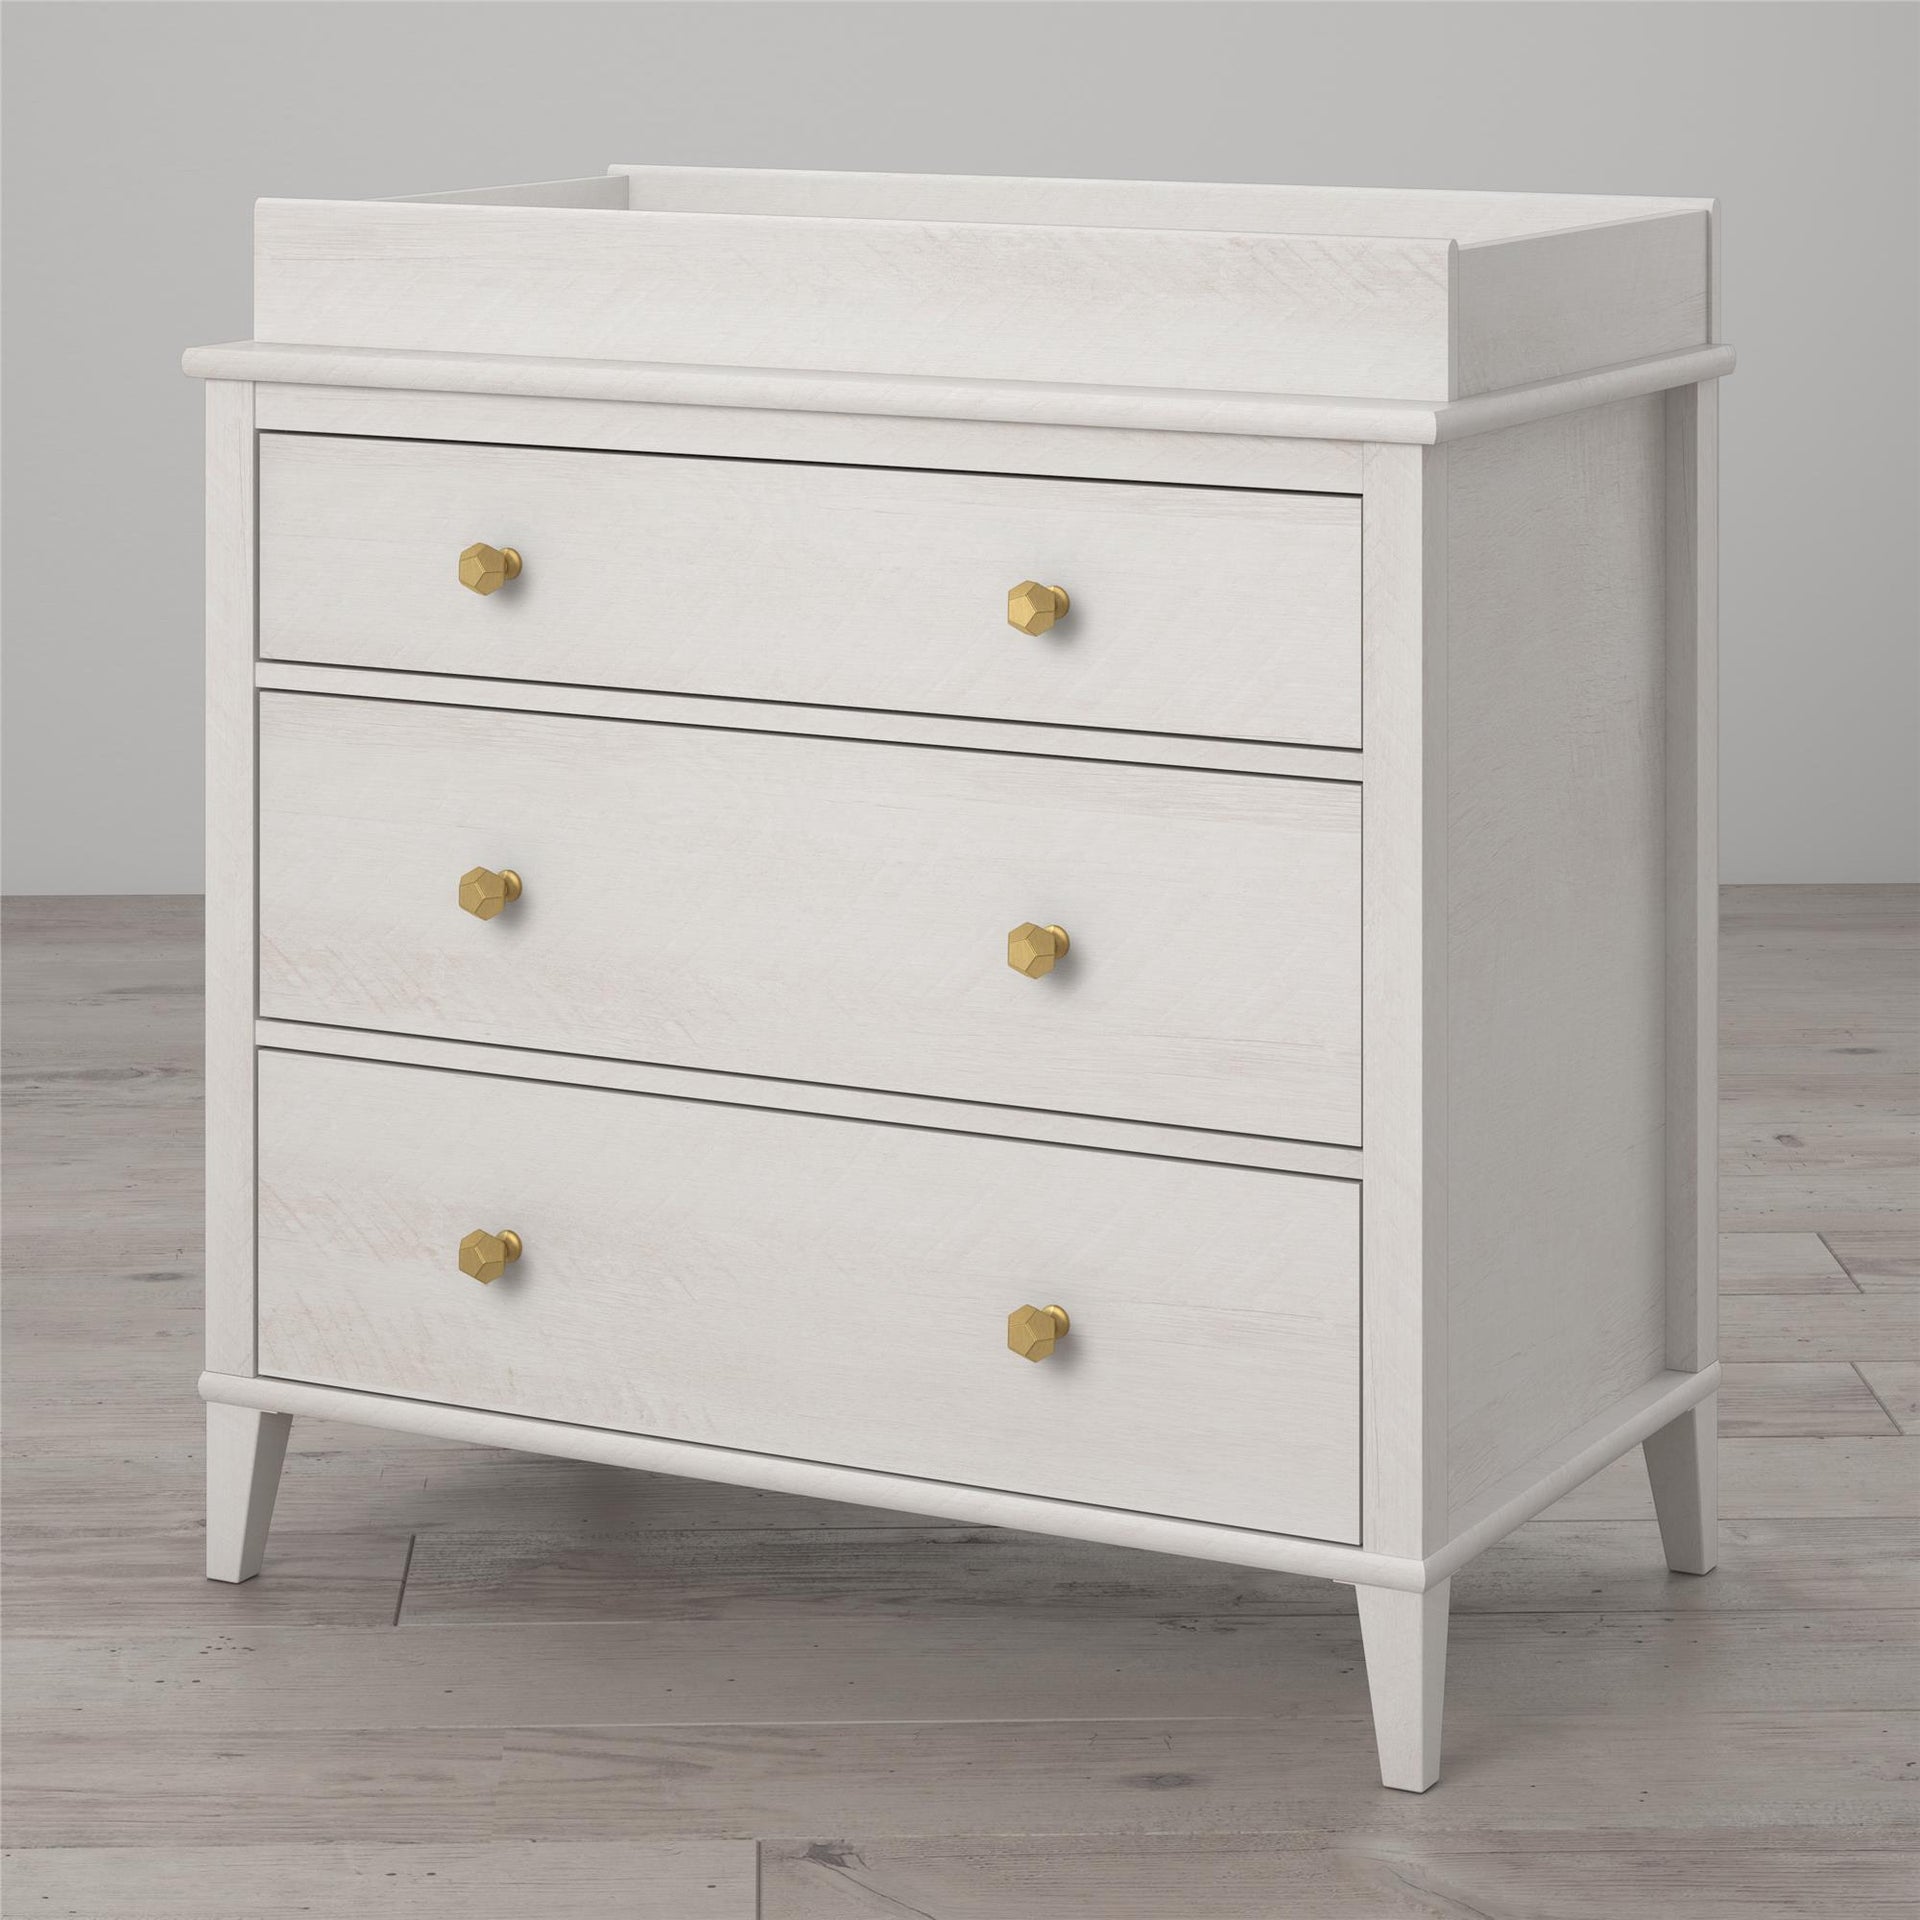 Monarch Hill Poppy 3 Drawer Changing Table - Ivory Oak